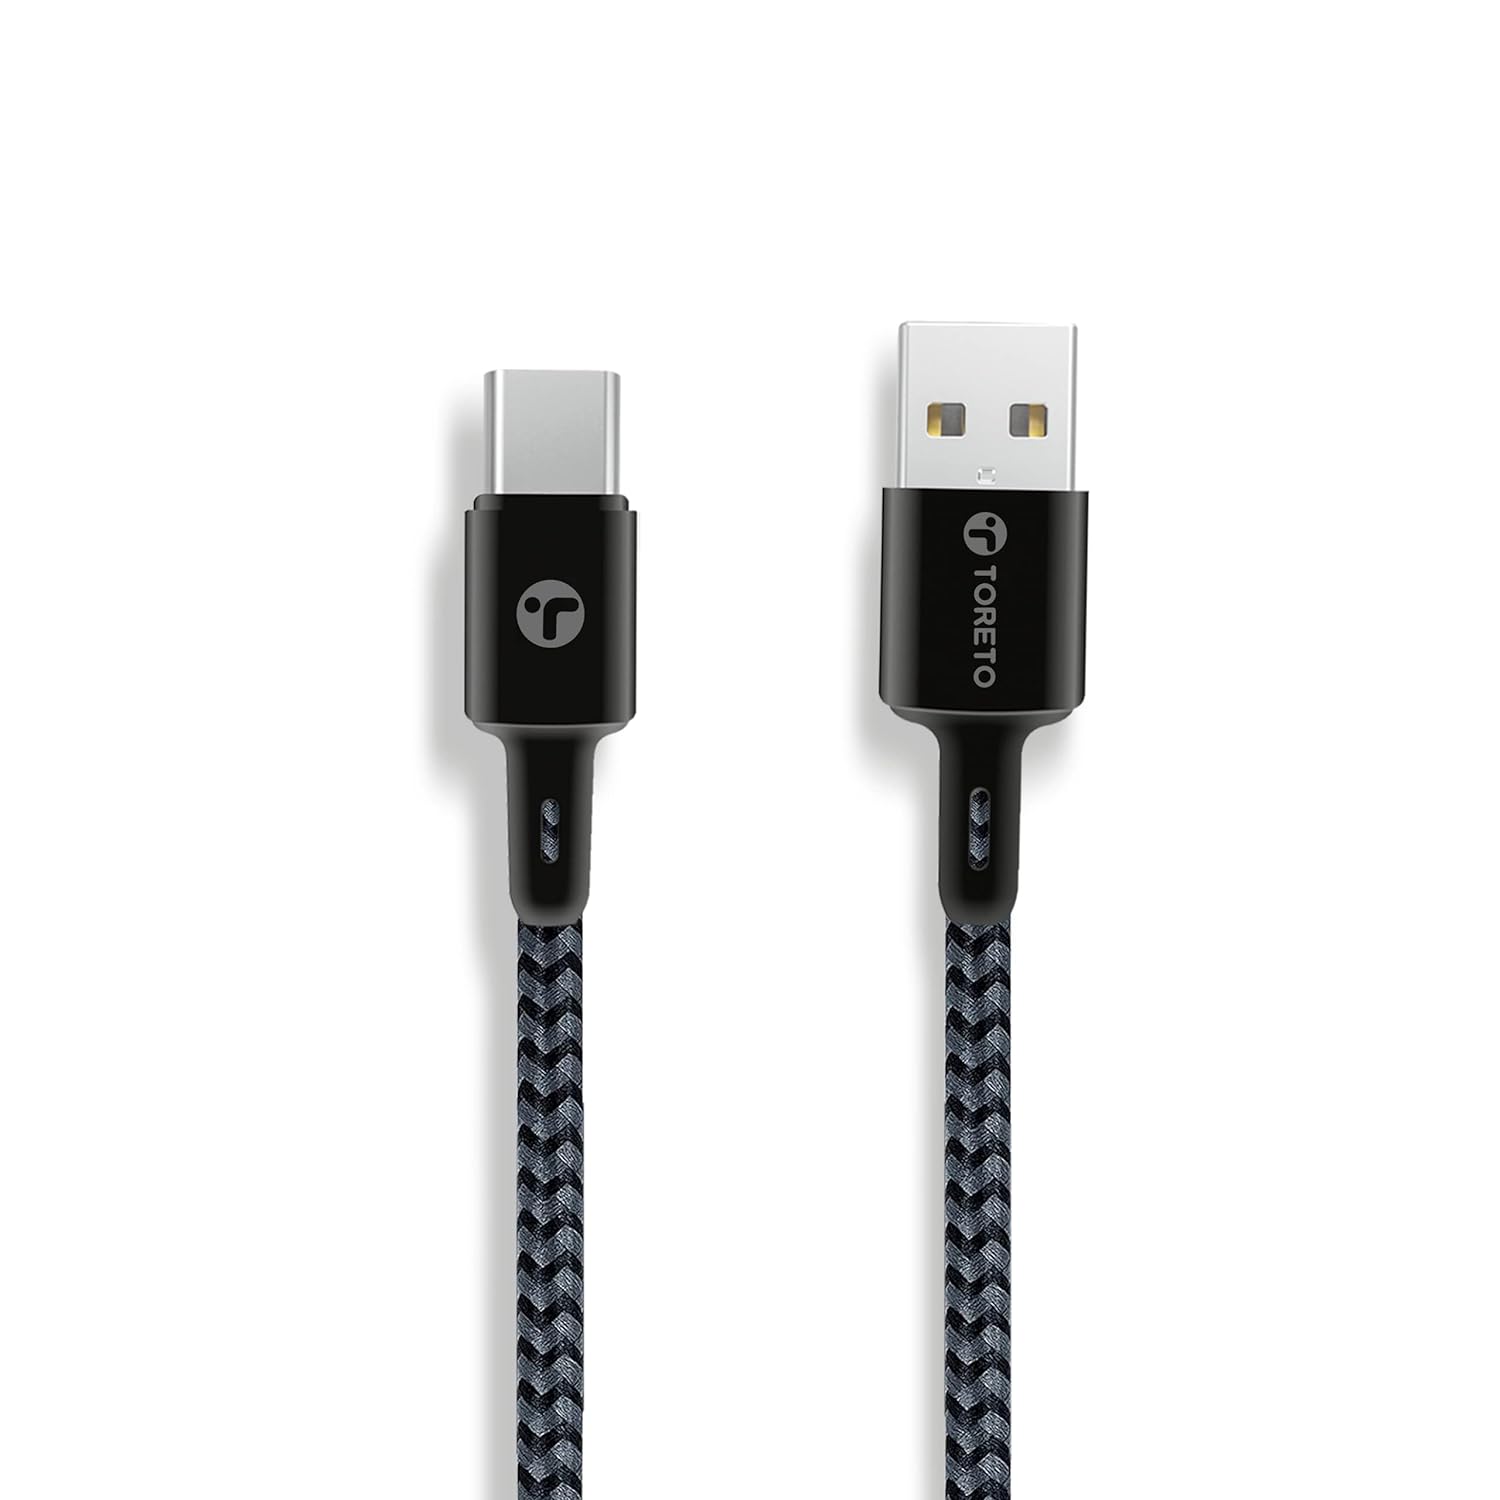 Toreto Dura 9 3A Type-C Data and Fast Charging Cable, Made in India, 480Mbps Data Sync, Strong and Durable 1-Meter Nylon Braided USB Cable for Type-C Devices (Black) (Type-C, 1 Meter)